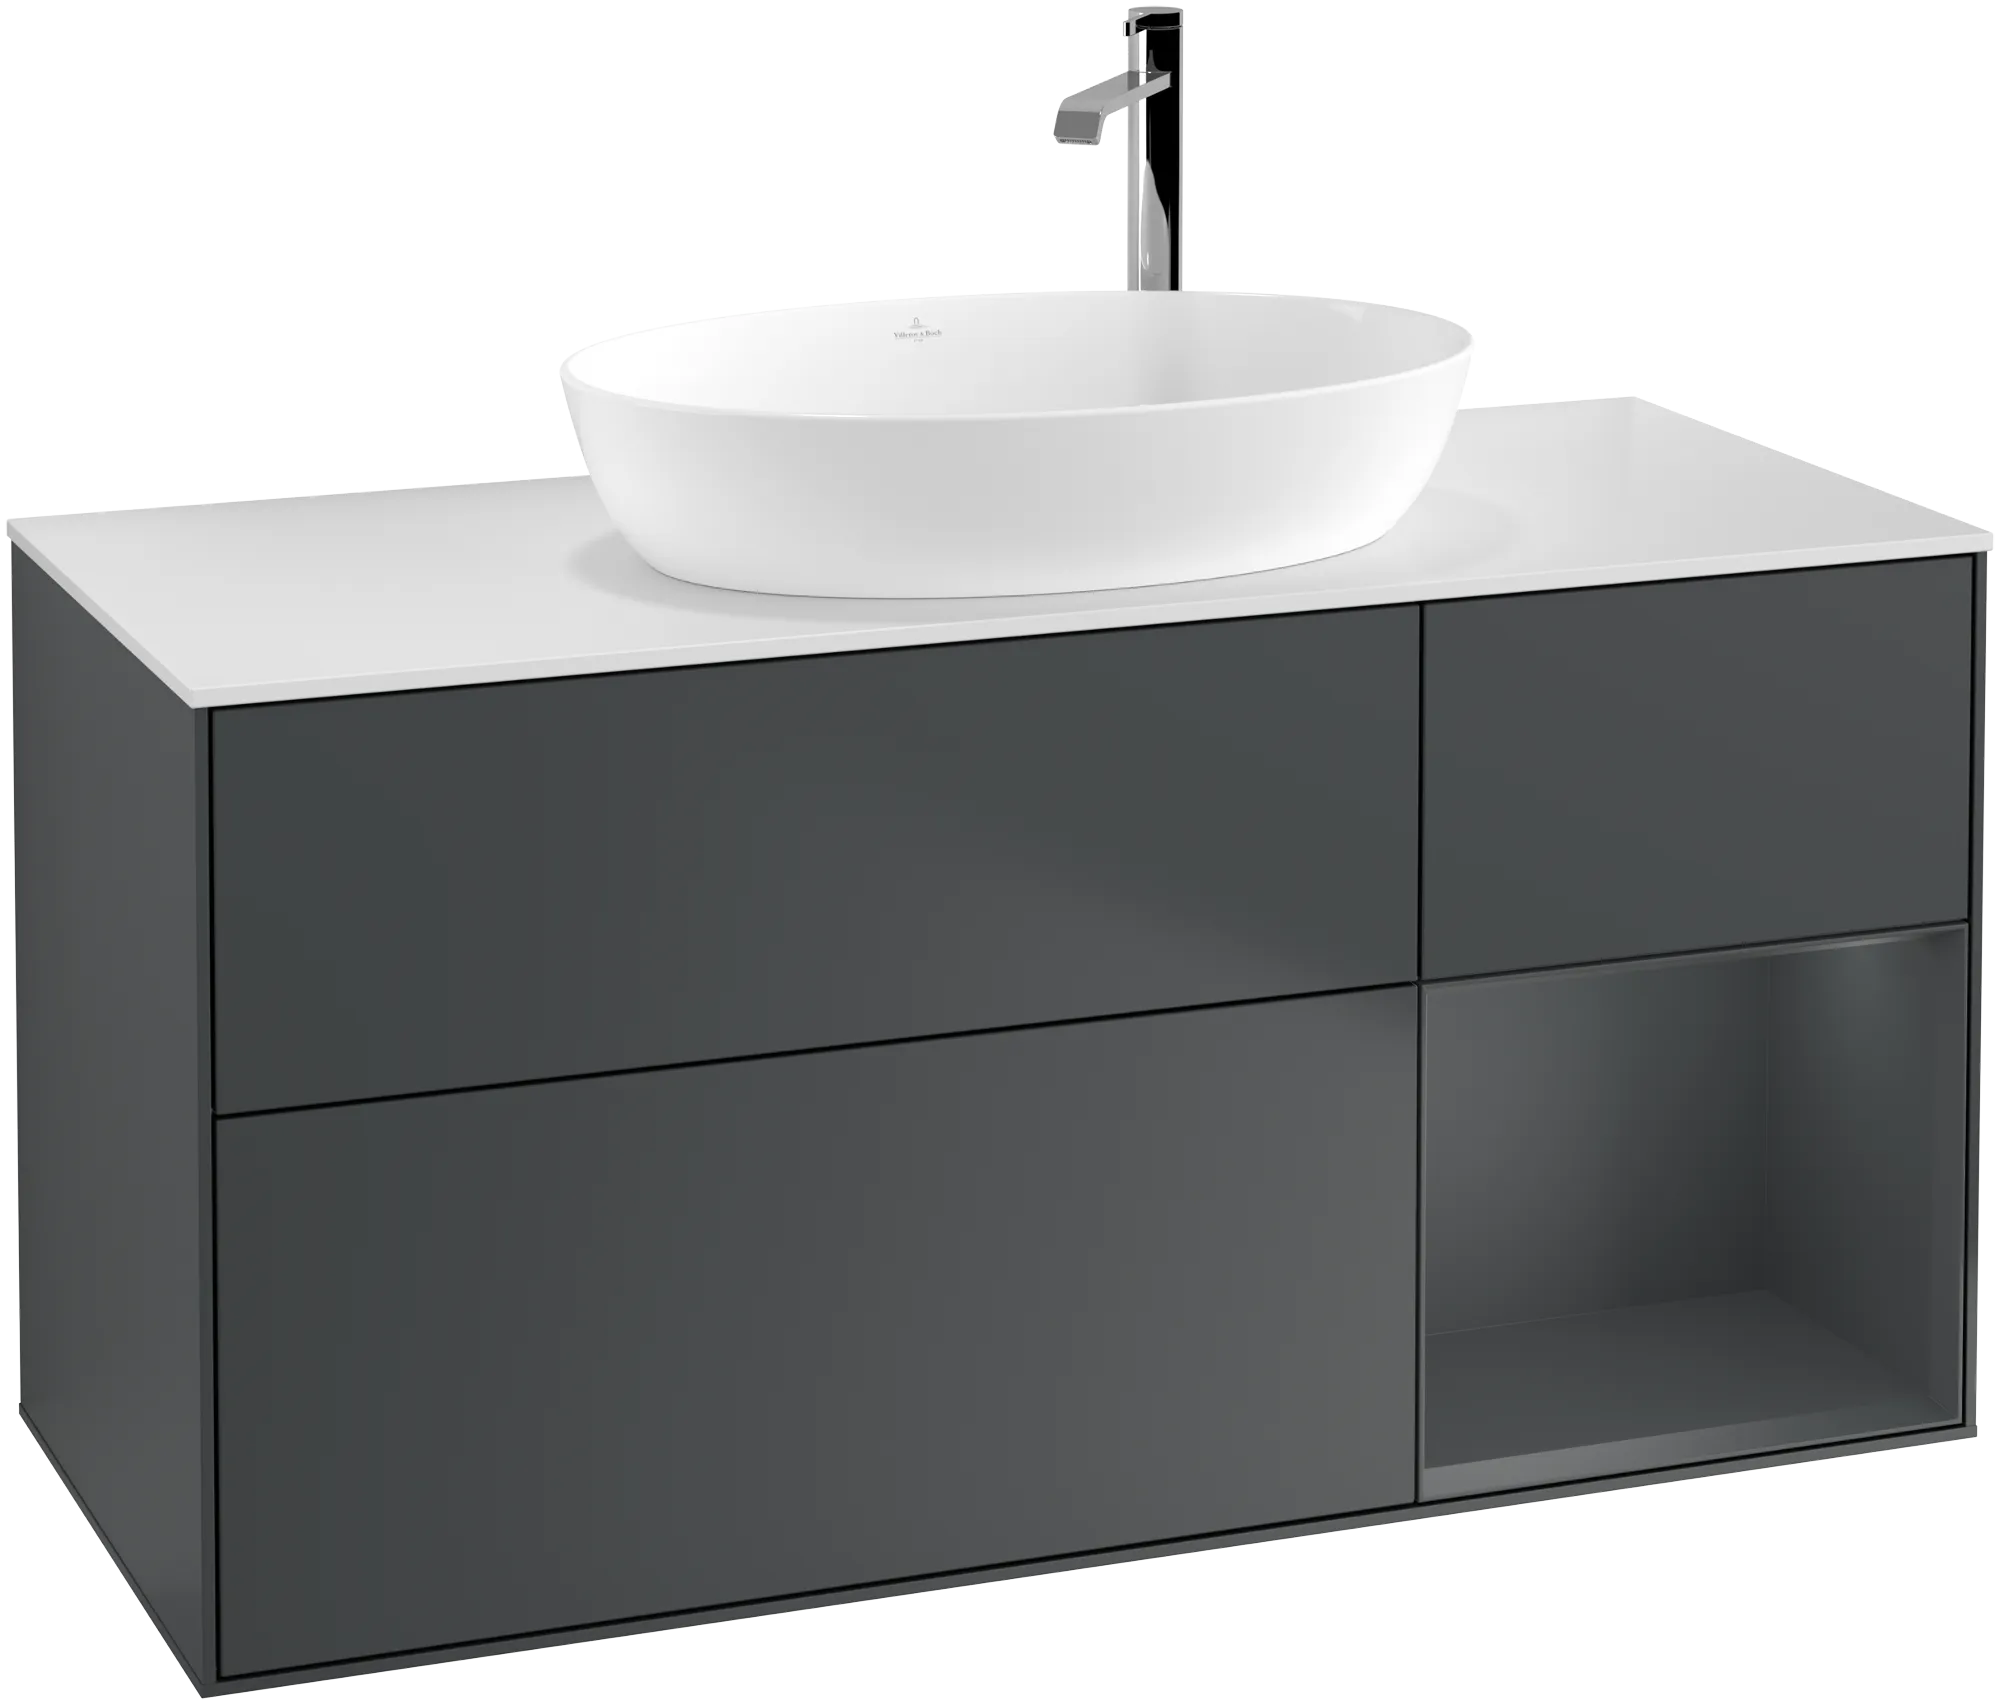 VILLEROY BOCH Finion Vanity unit, with lighting, 3 pull-out compartments, 1200 x 603 x 501 mm, Midnight Blue Matt Lacquer / Midnight Blue Matt Lacquer / Glass White Matt #G951HGHG resmi